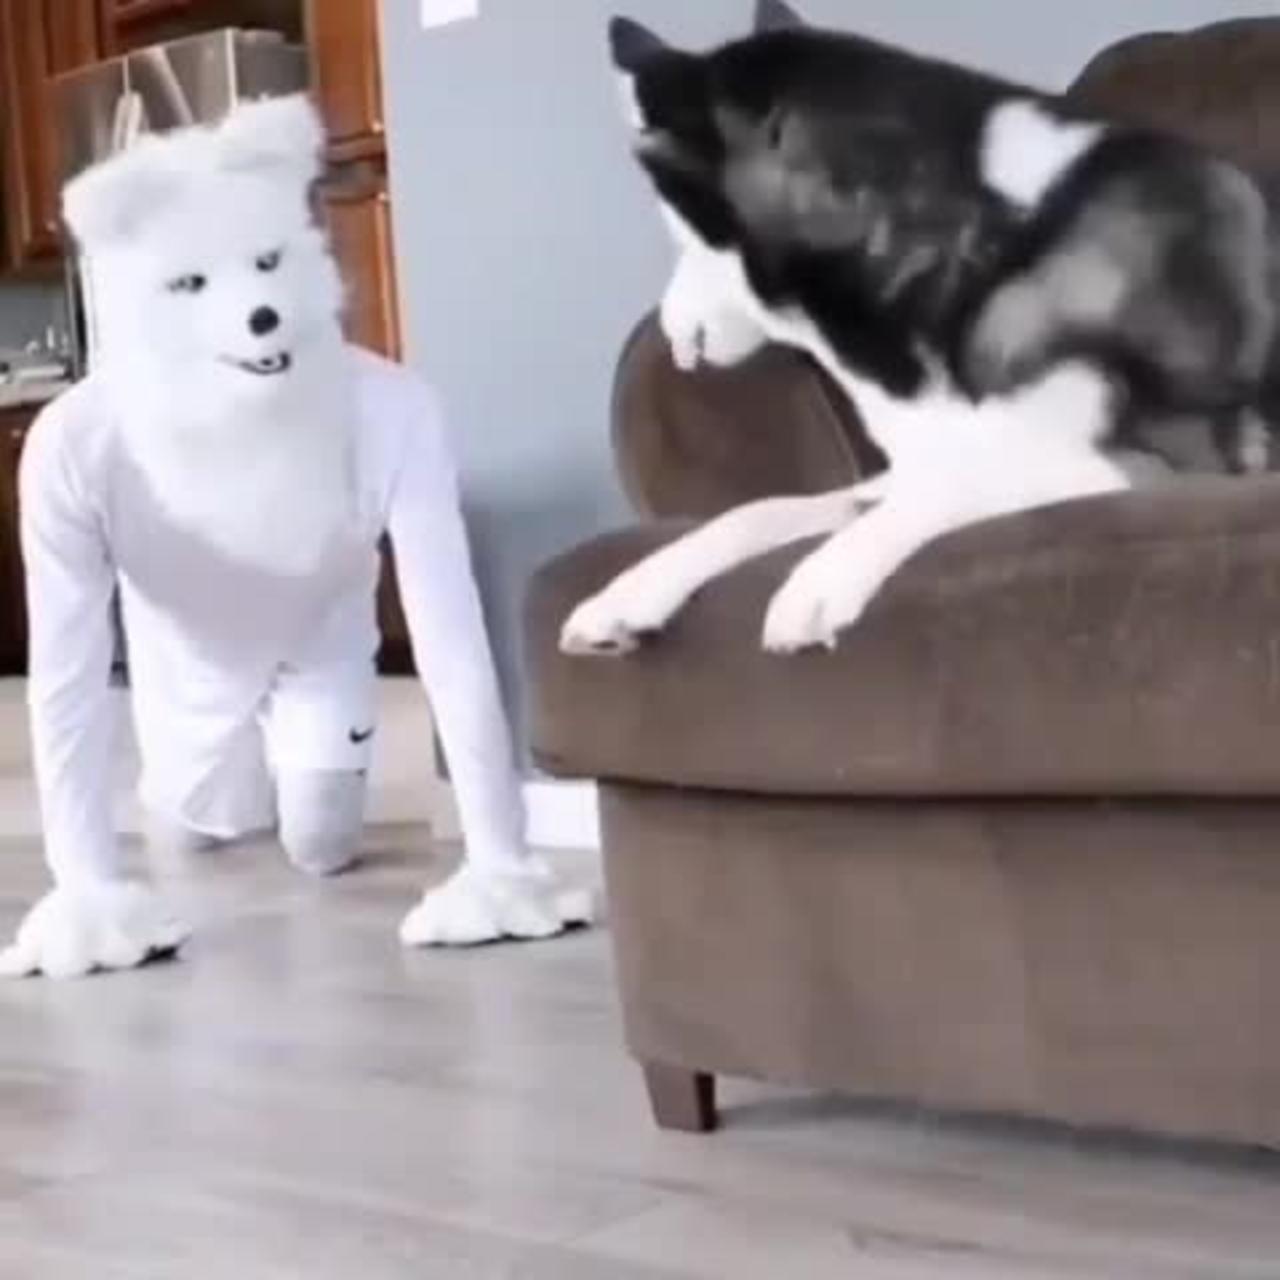 He really scared🤣🤣😂 Funny dog video 🤣#shorts